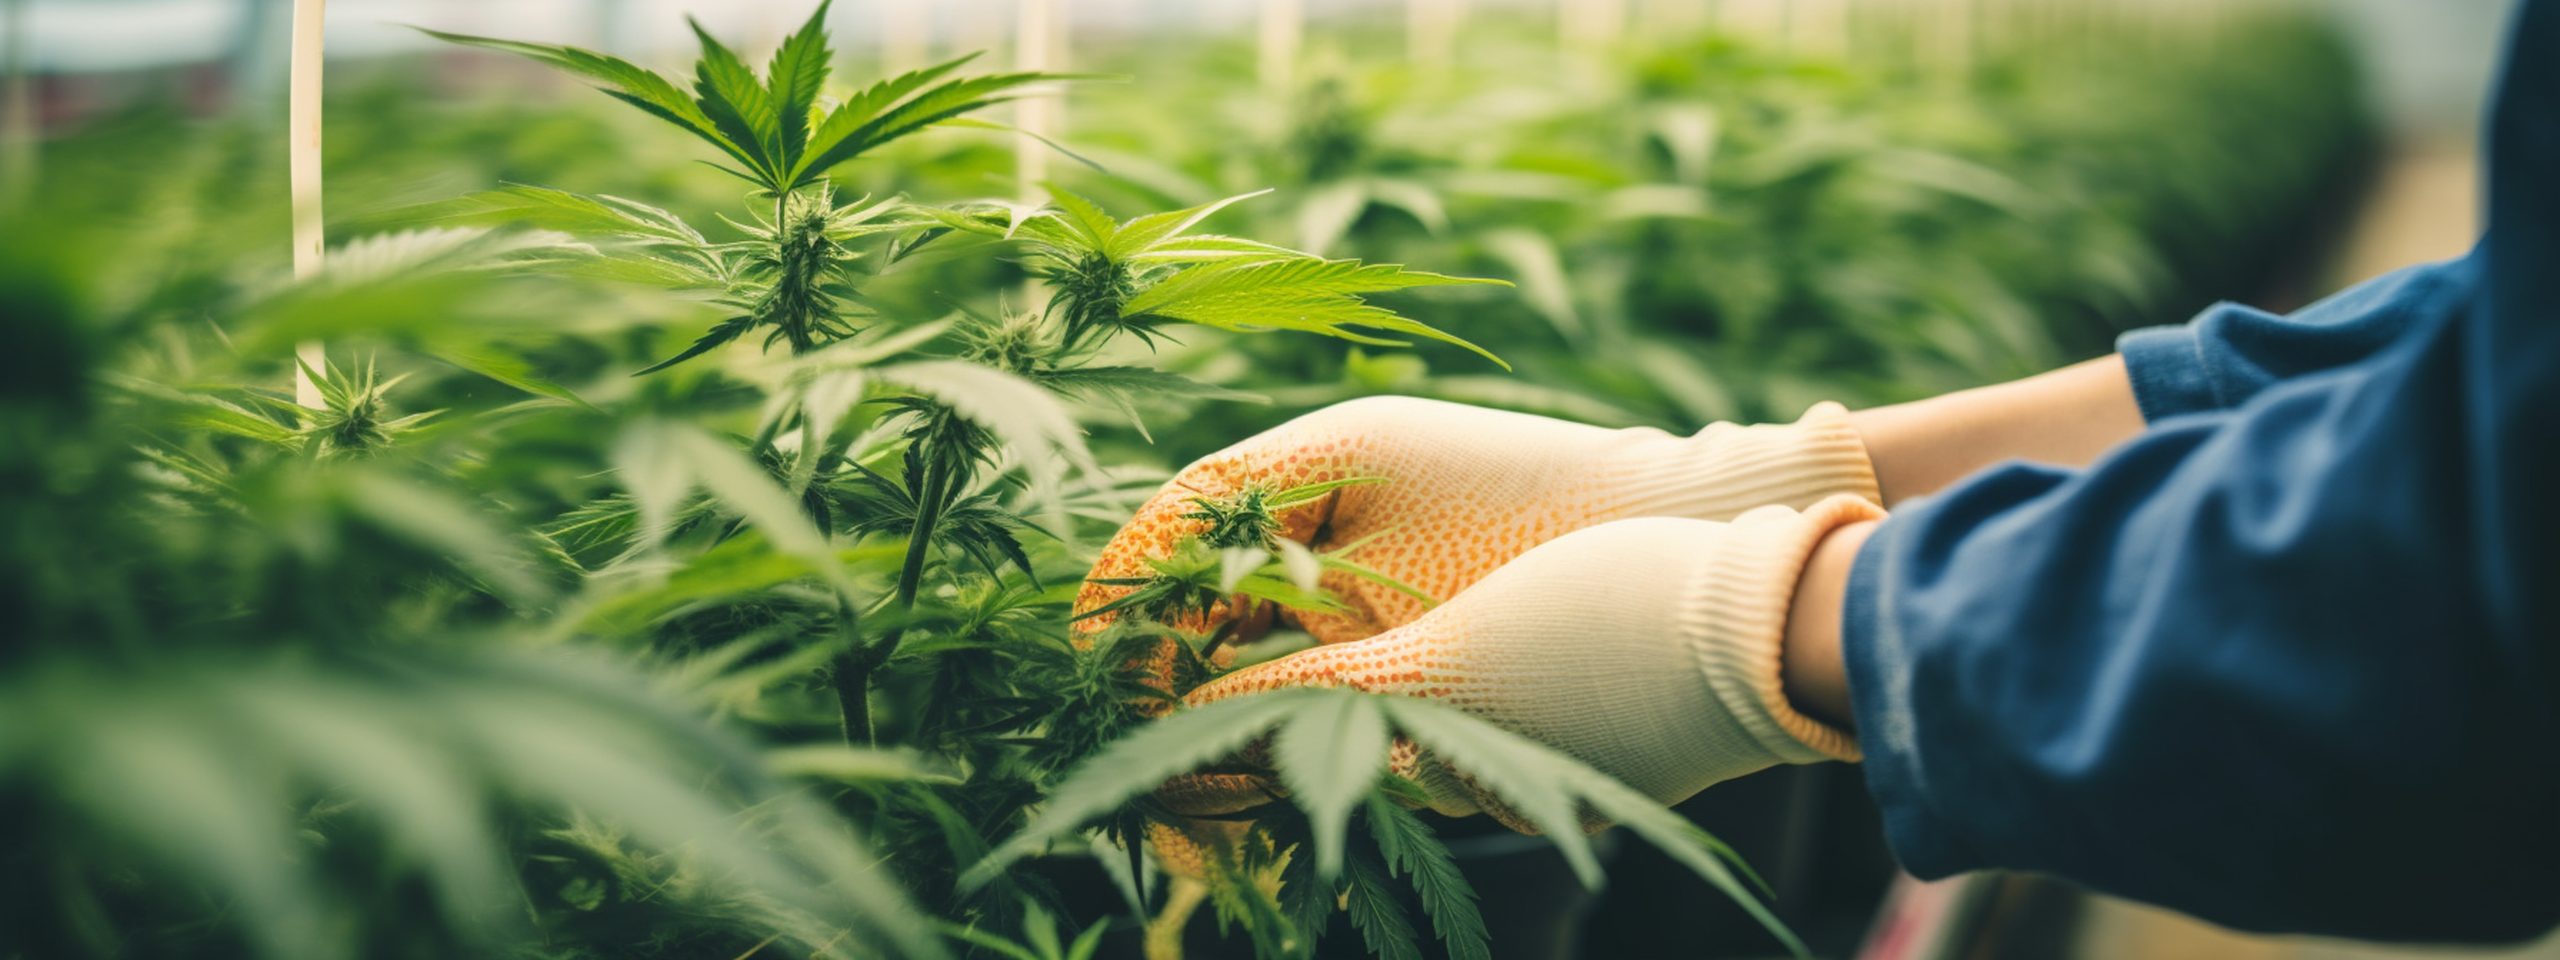 A scientist's hand close-up inspects the pleasant buds on a cannabis plant. Cannabis plantation in a medicinal indoor farm.